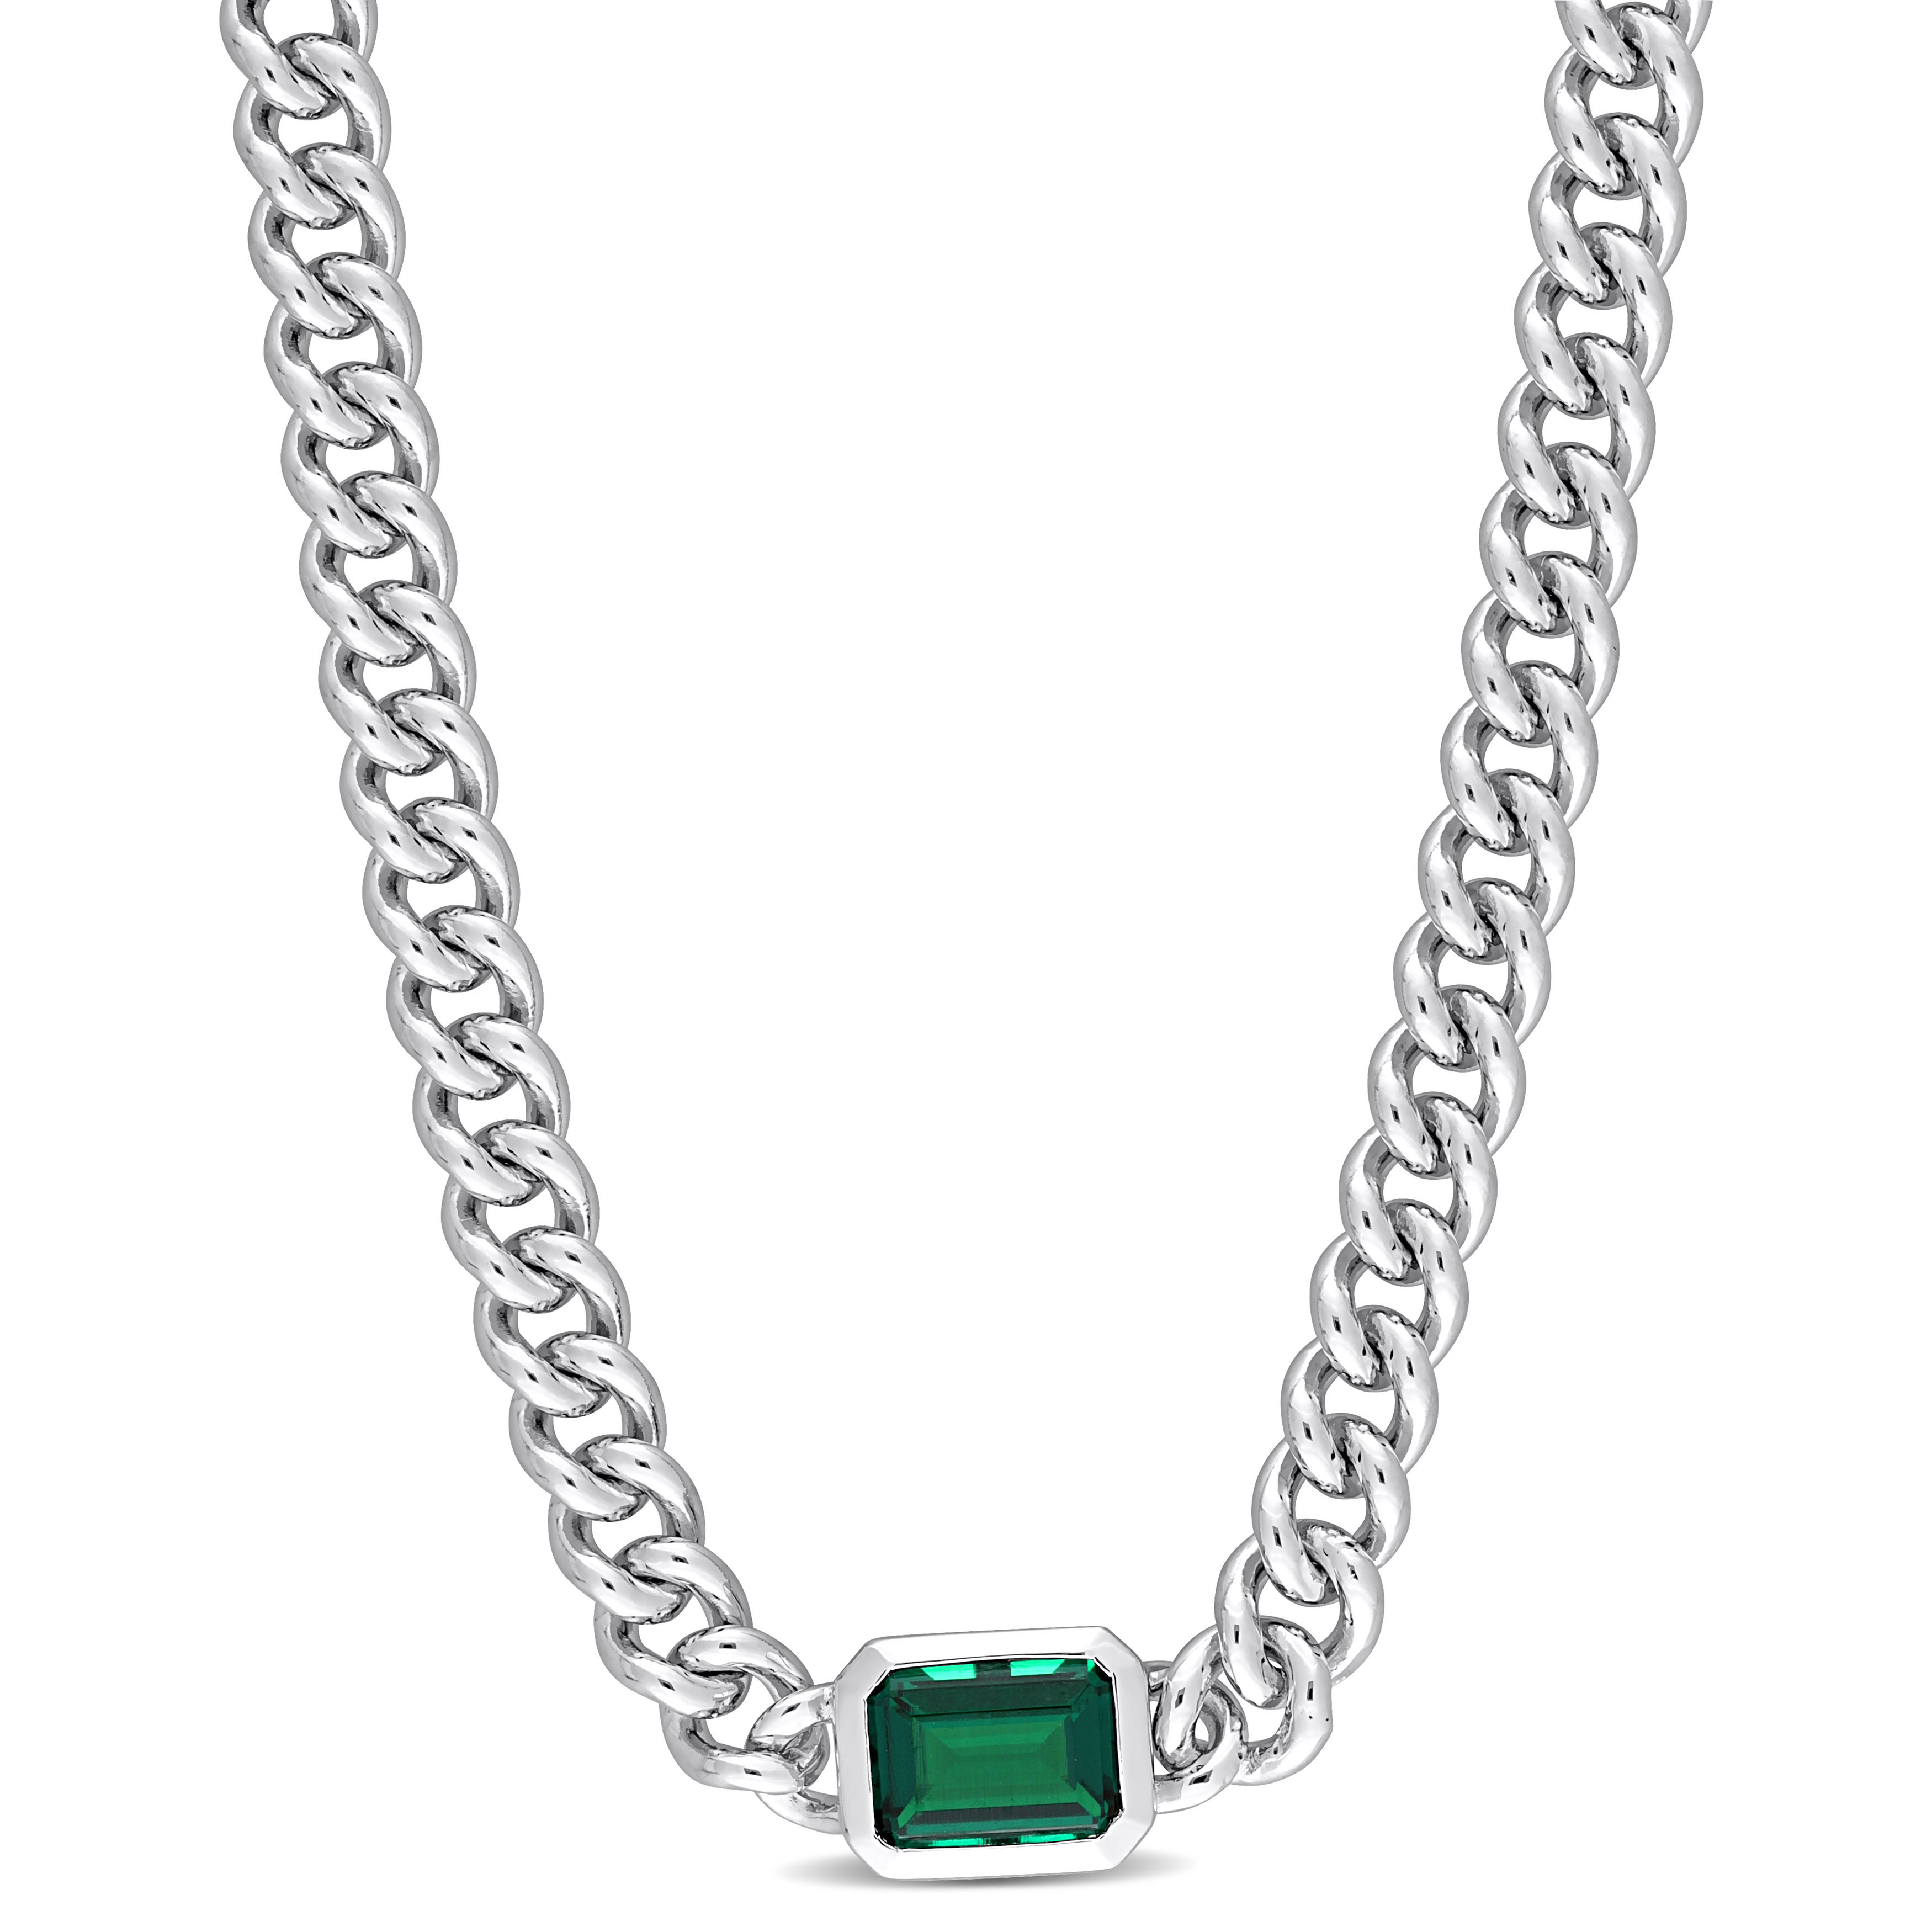 7/8 CT TGW Octagon Created Emerald Curb Link Chain Necklace in Sterling Silver - 16 in.